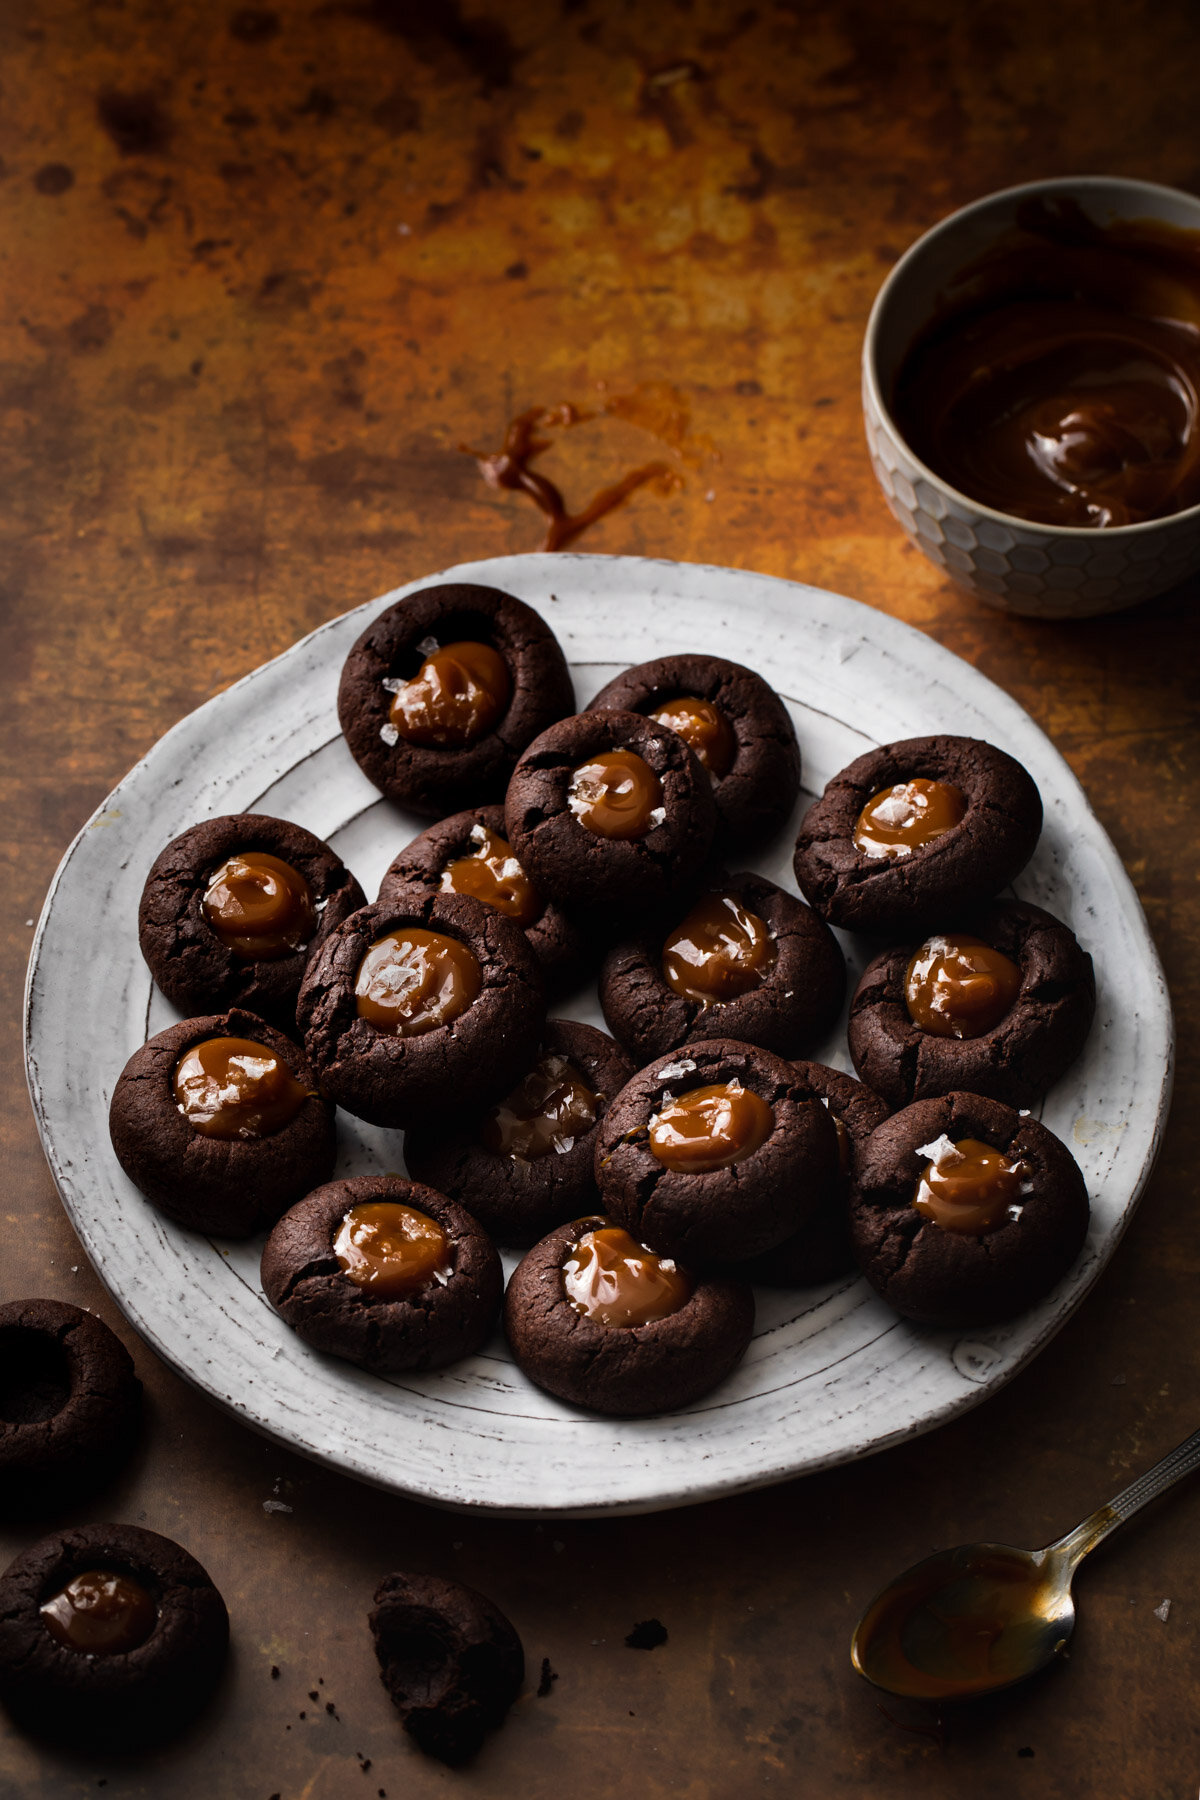 Gingerbread Chocolate Thumbprint Cookies with Dulce de leche and flaky salt